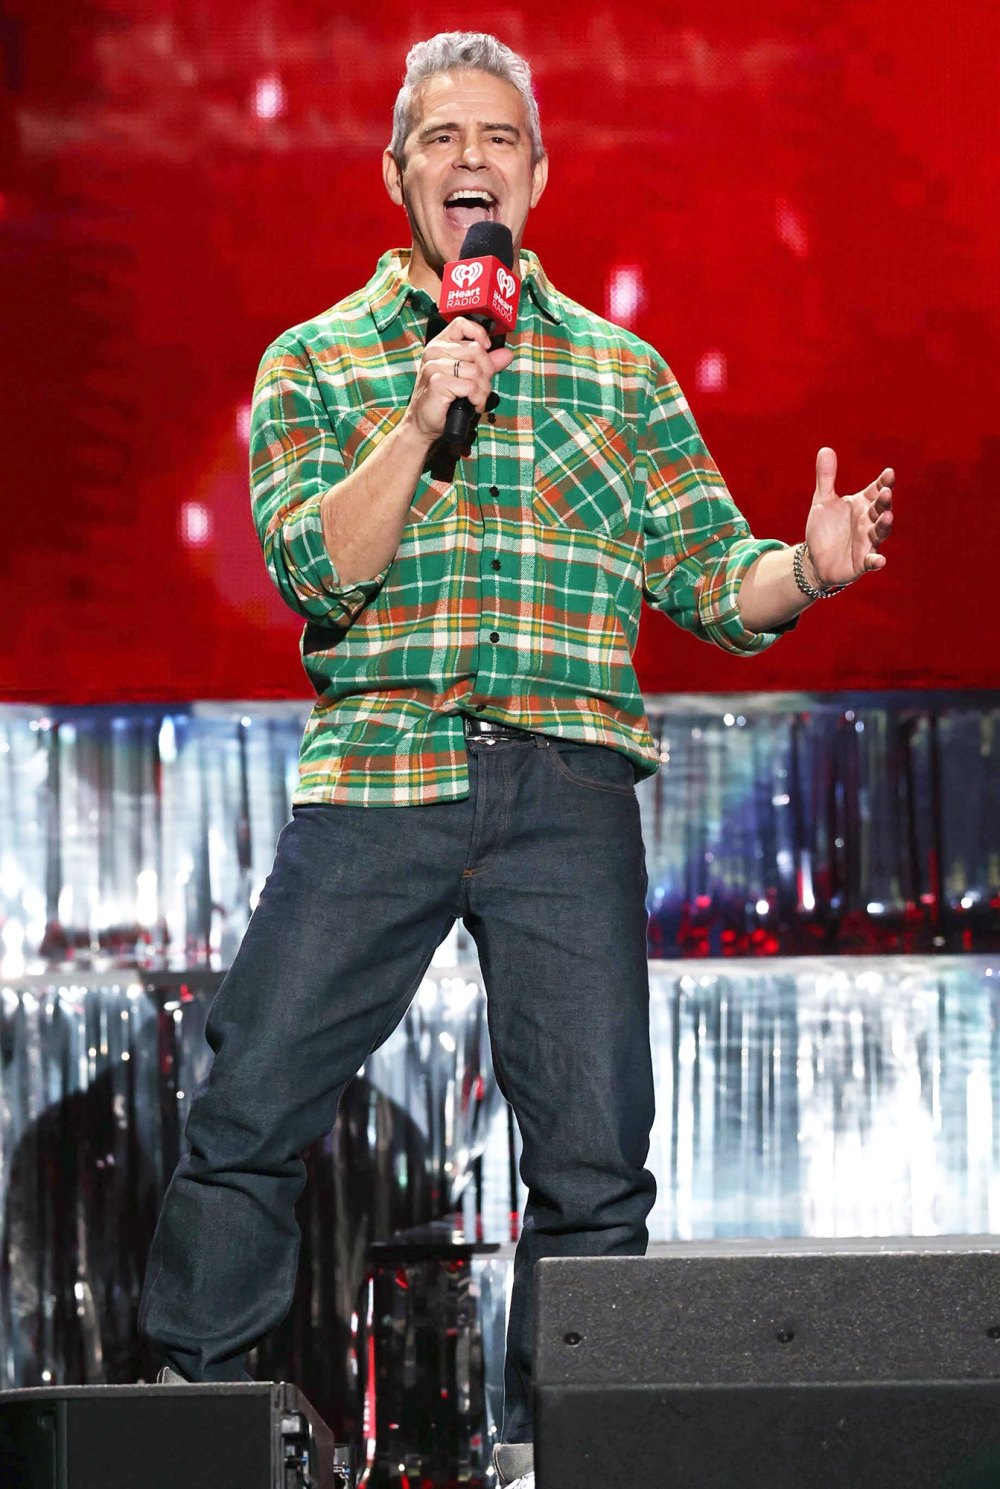 Andy Cohen Jokes He Deserves Meme Treatment for His Jingle Ball Outfit Fans Compare to Nsync